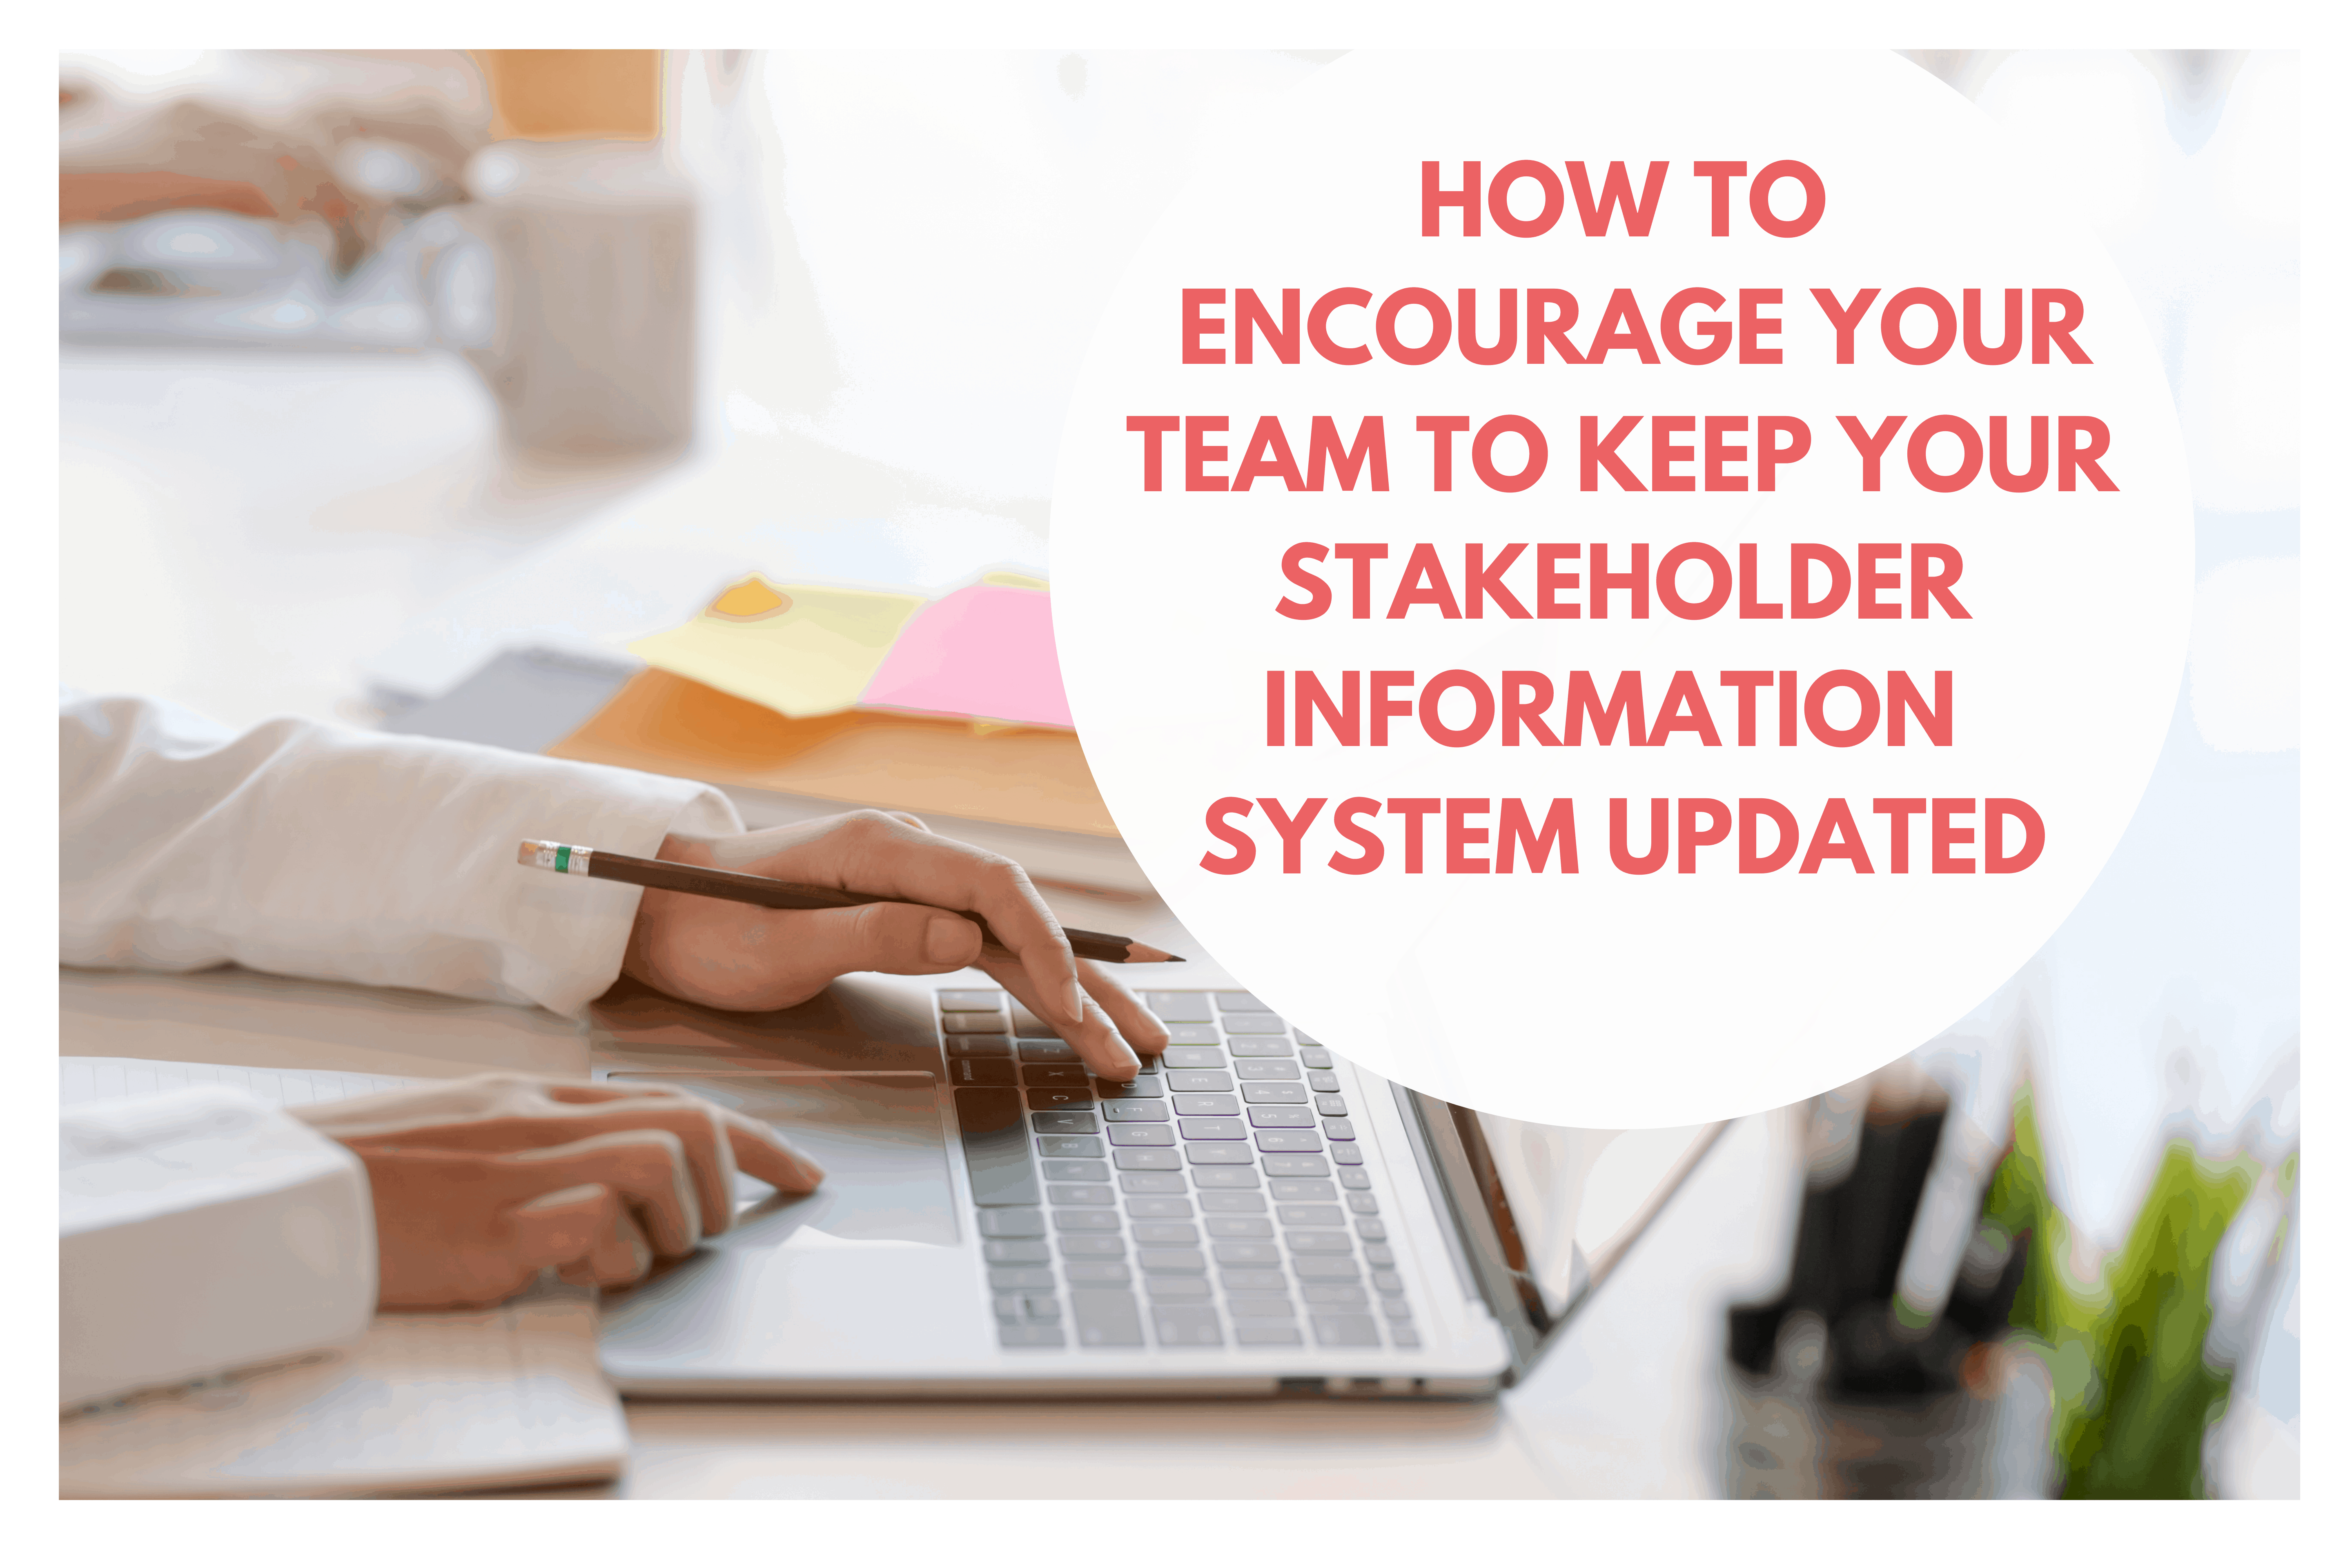 How to encourage your team to keep your stakeholder information system updated (1)